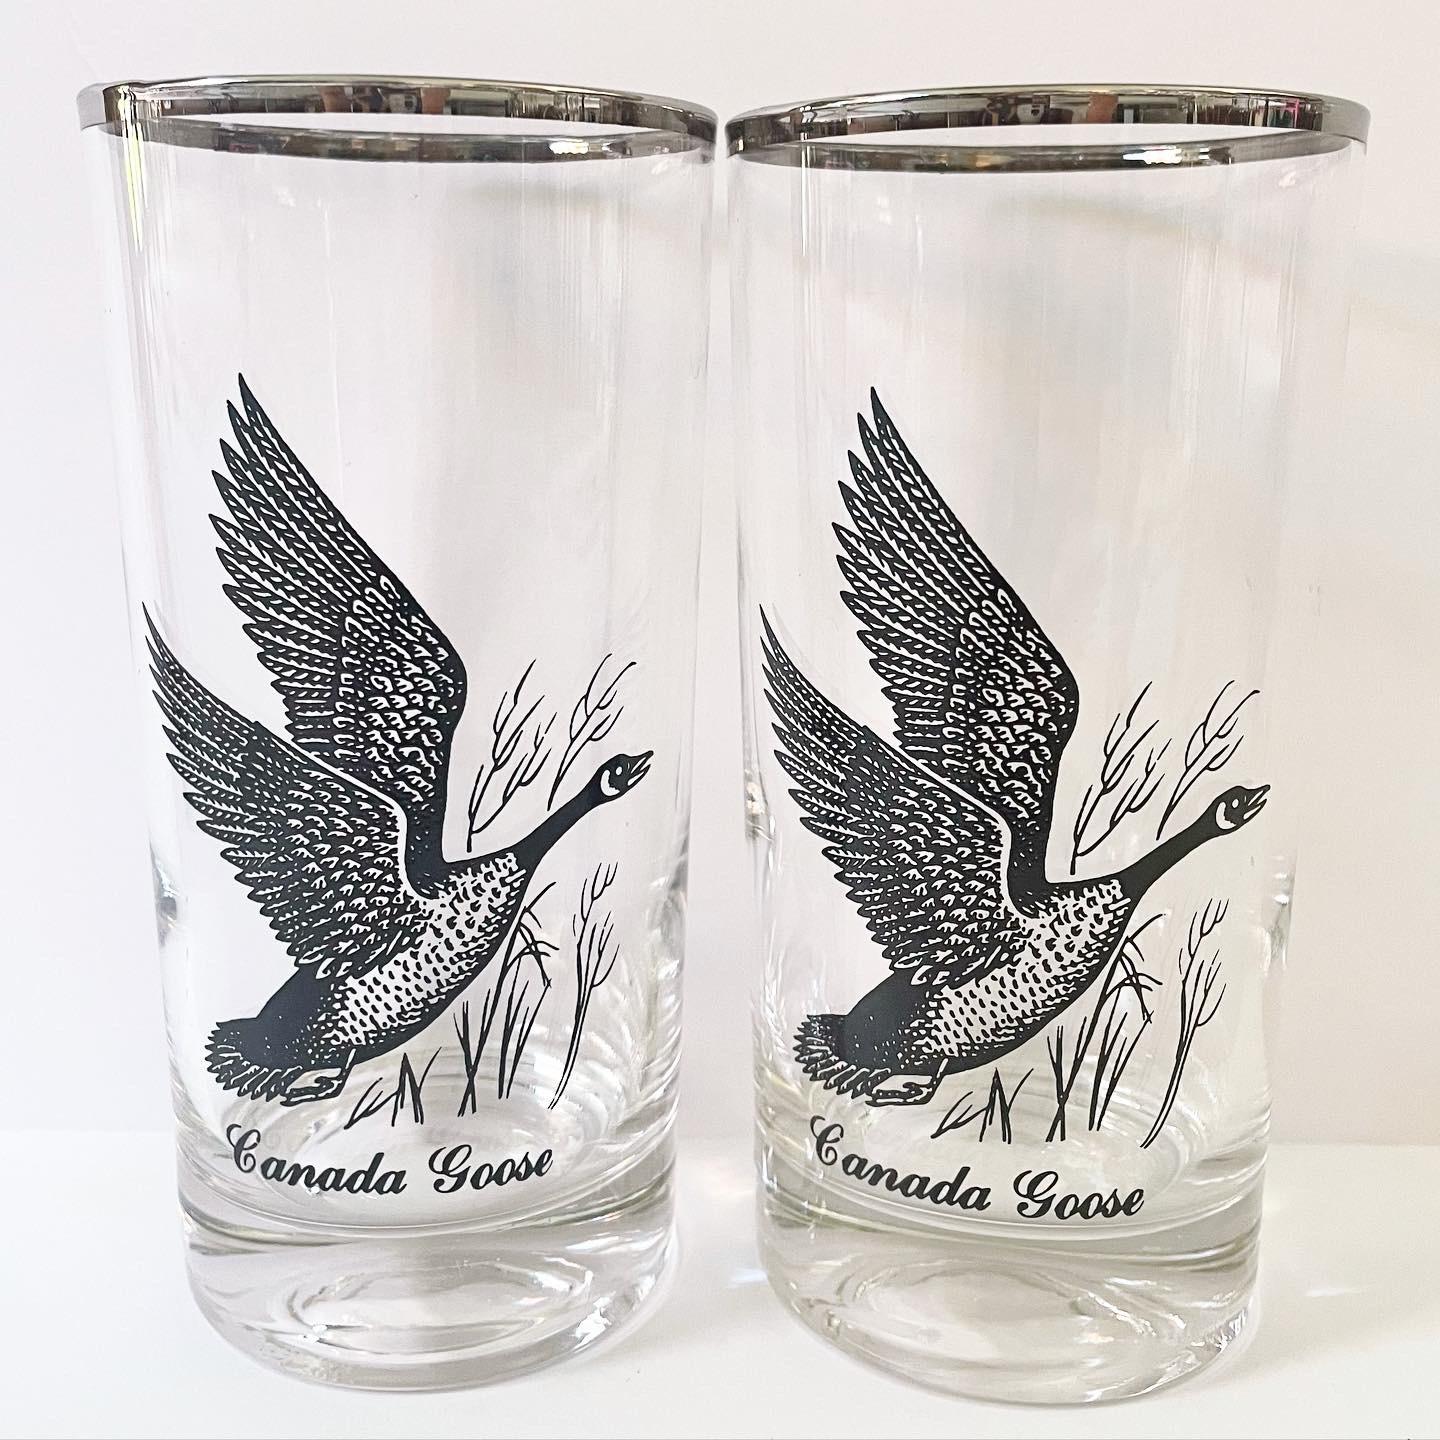 Mid Century Highball Glasses With Ducks and Birds and Silver Rims - Set of 8